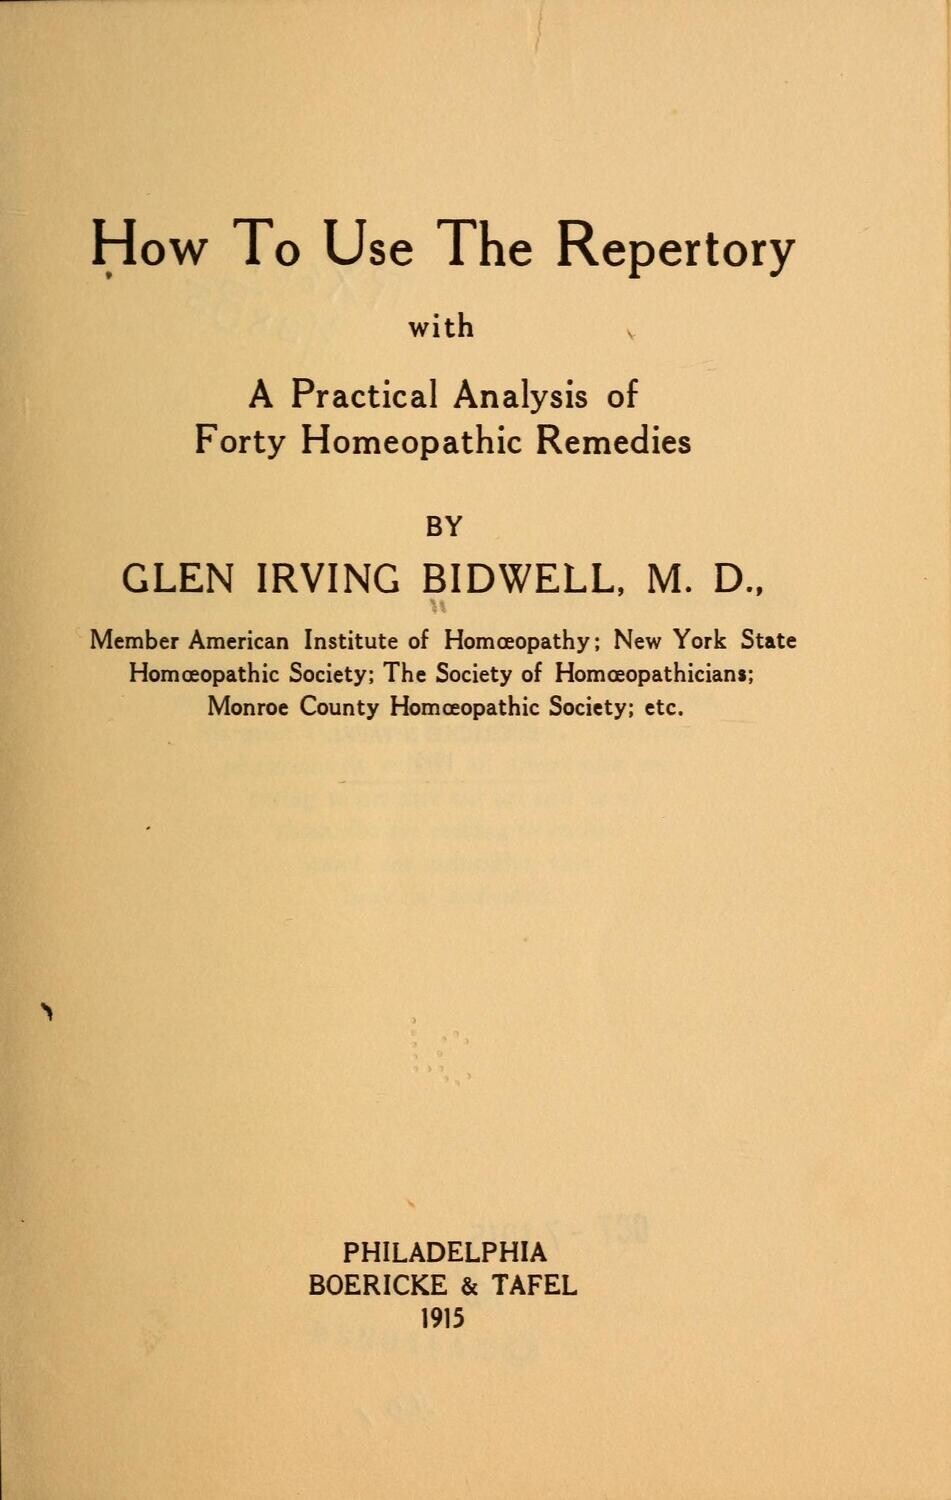 How to use the repertory (Bidwell)